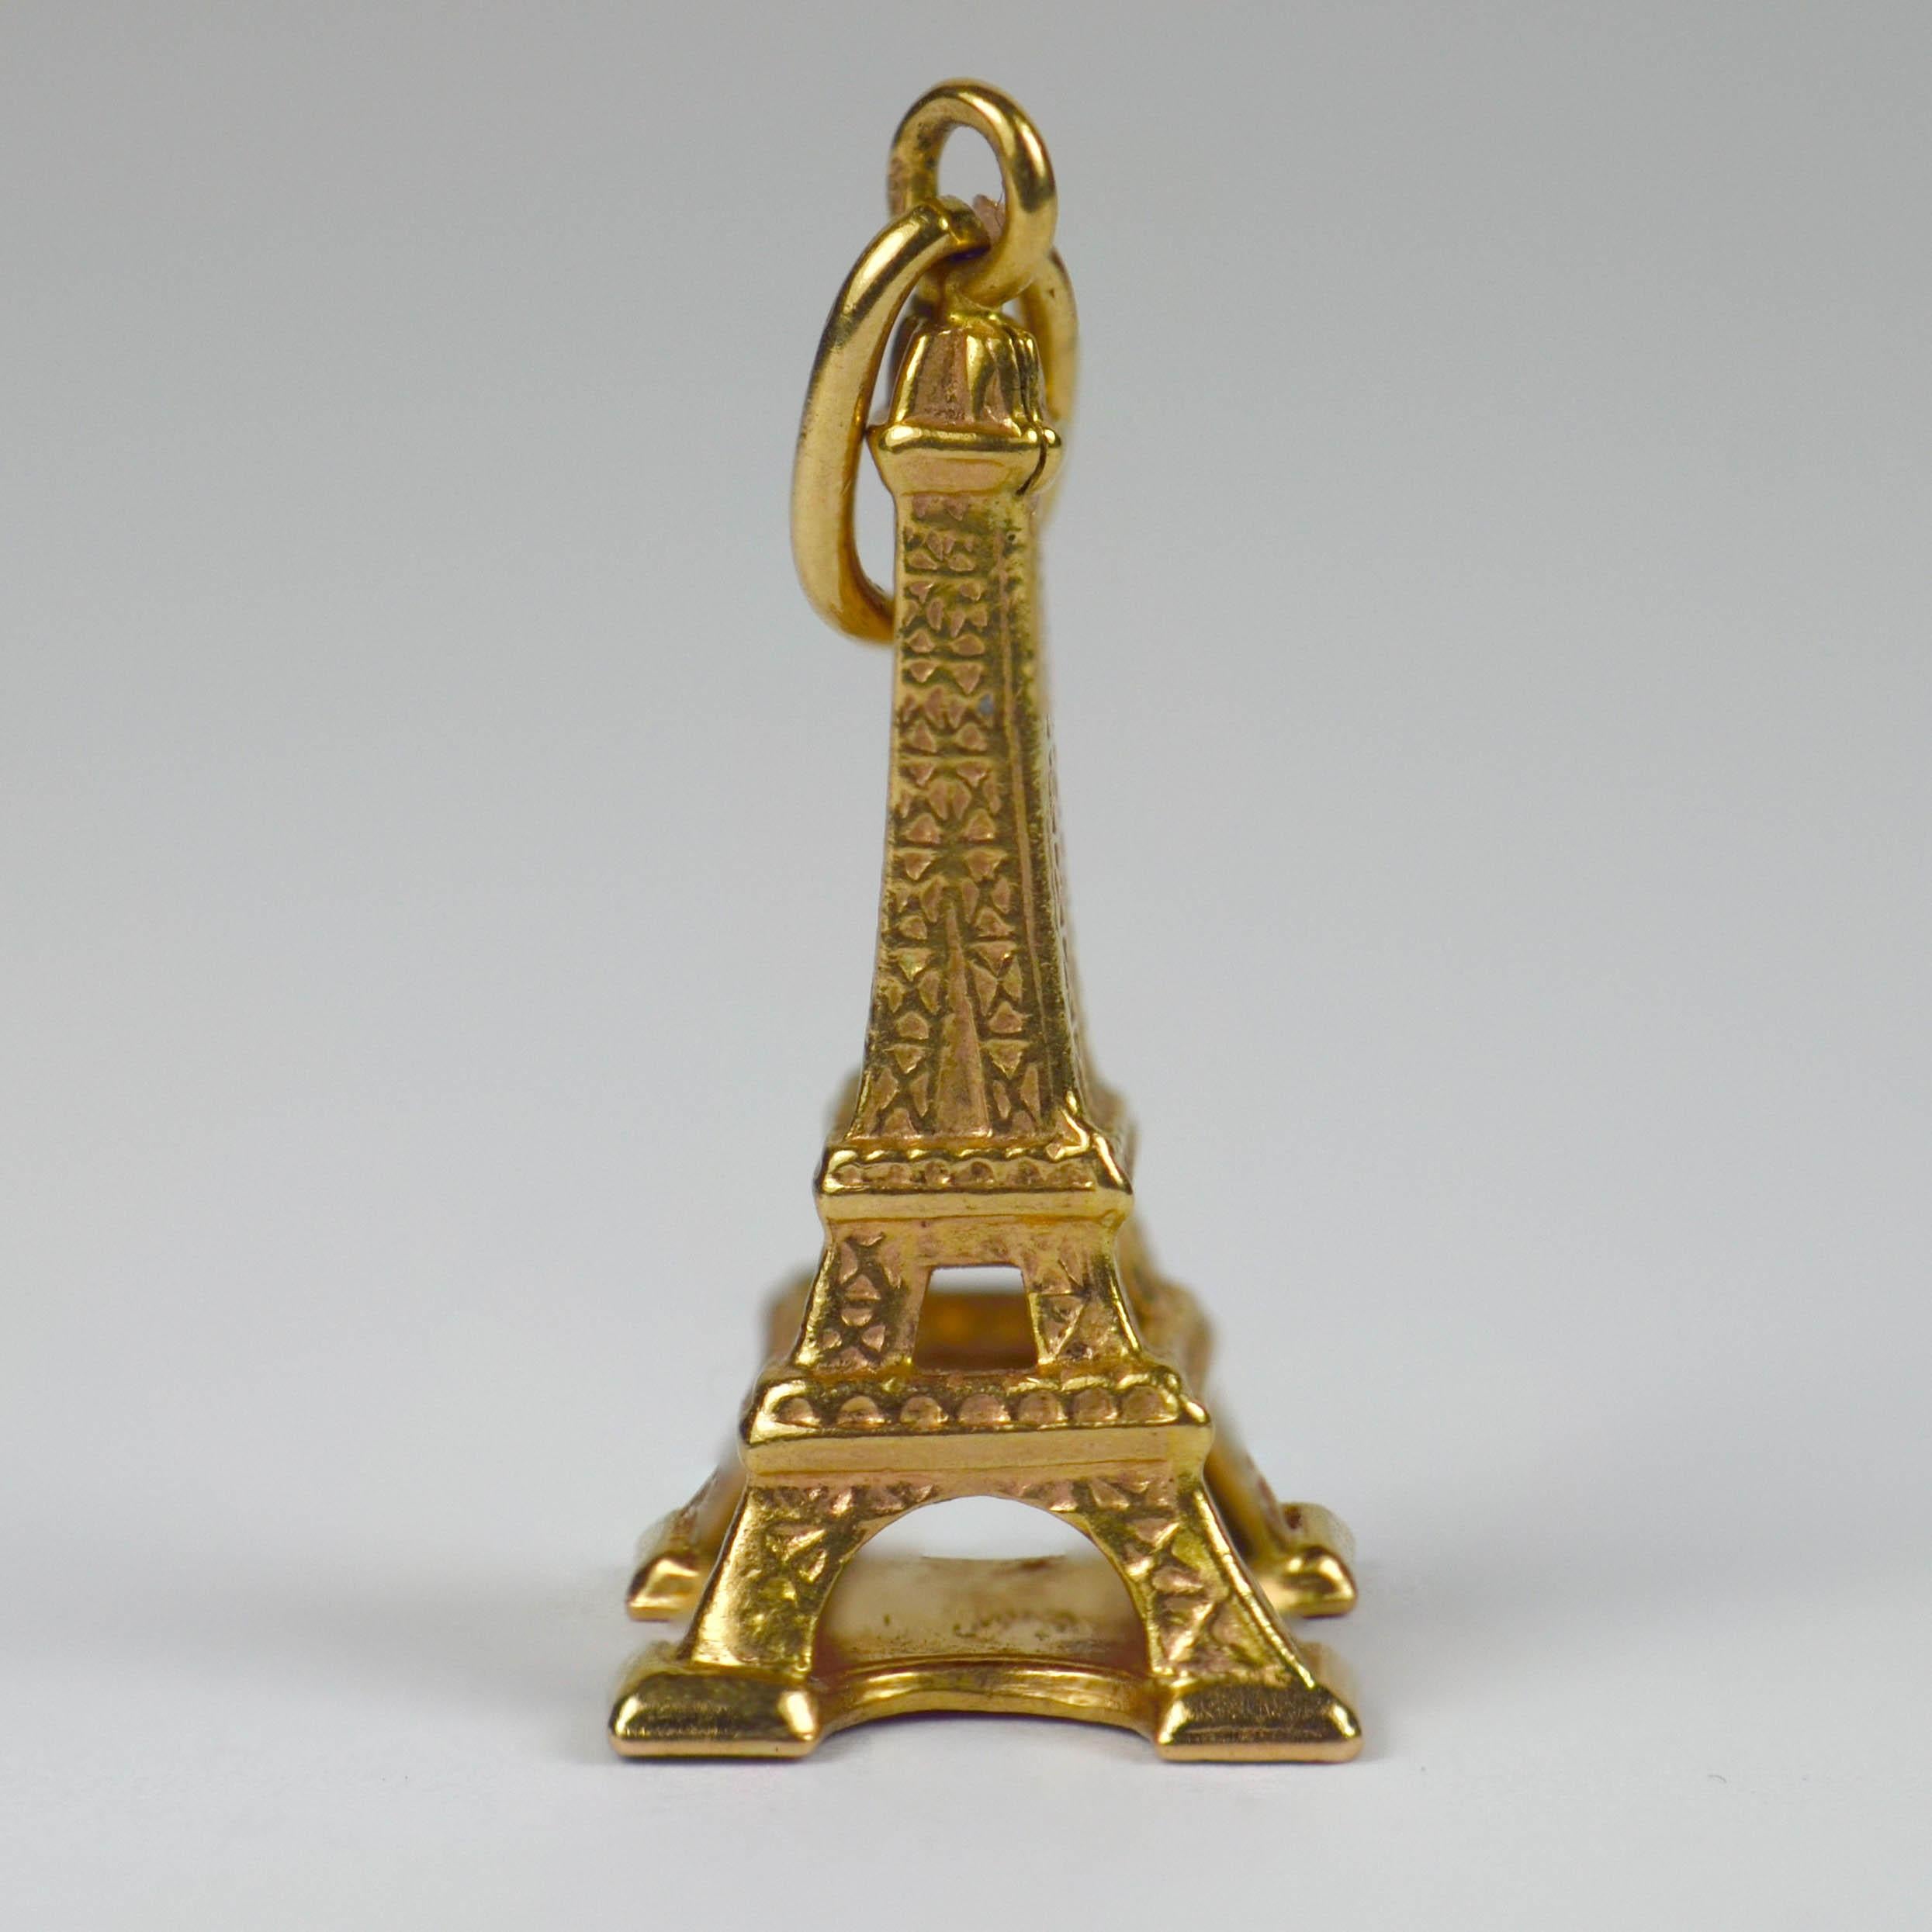 An 18 karat yellow gold charm pendant designed as the well known Paris landmark, the Eiffel Tower. 
Stamped with the eagles head for 18 karat gold and French manufacture.

Dimensions: 2.5 x 0.9 x 0.9 cm
Weight: 1.03 grams